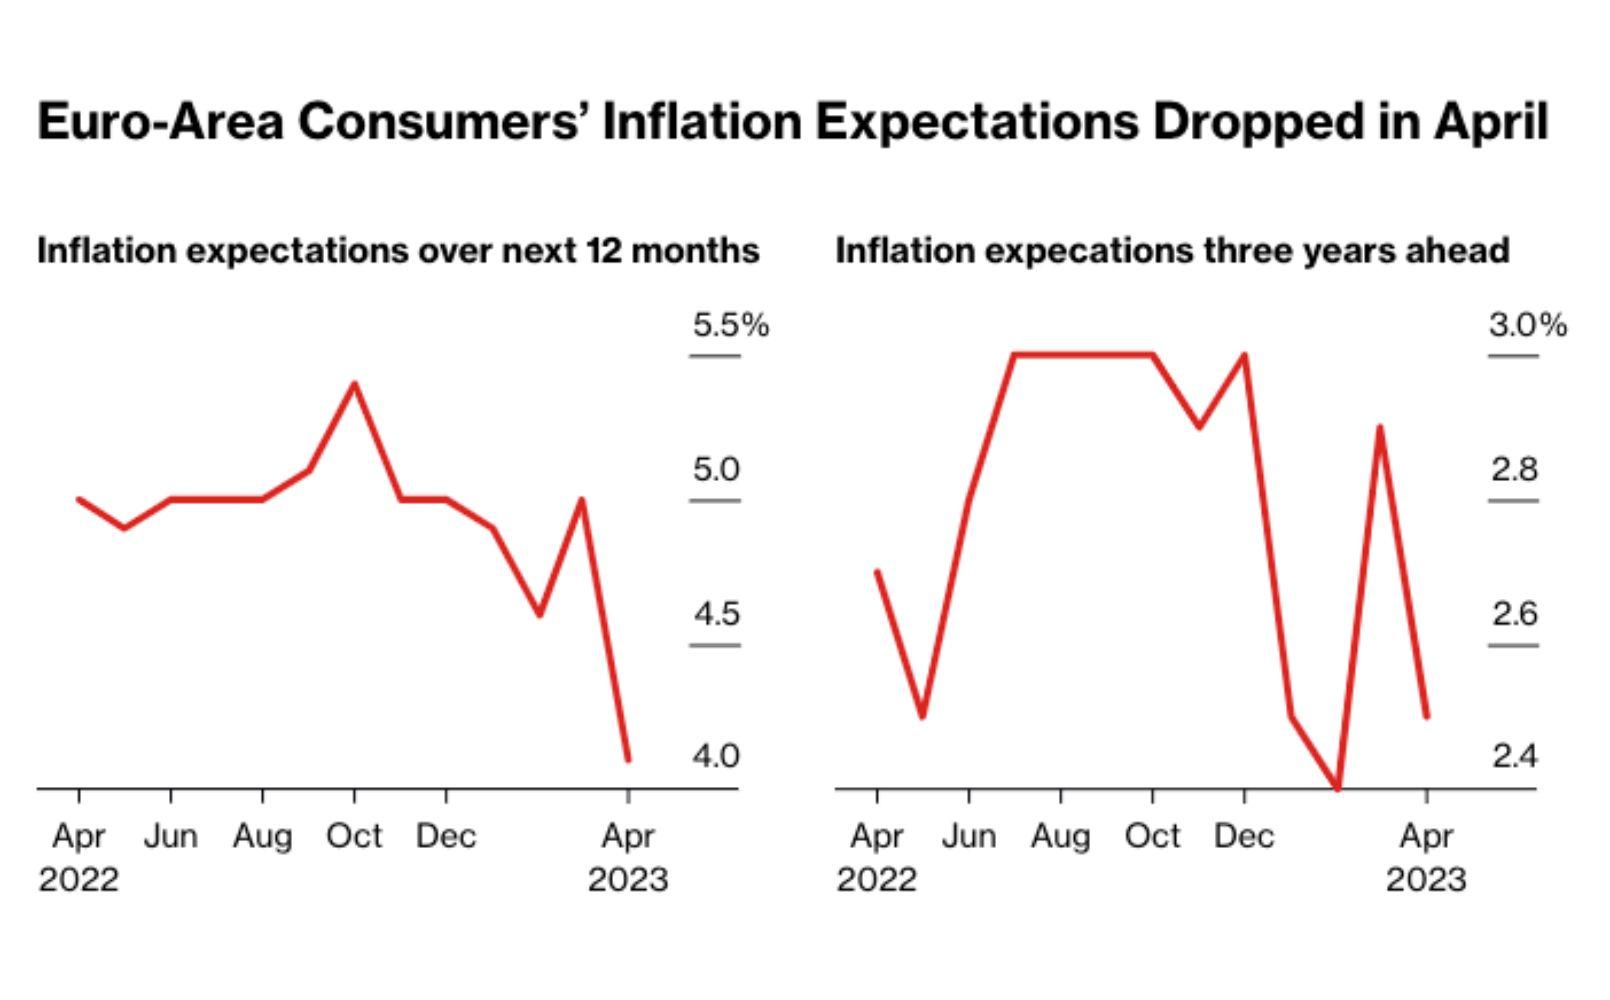 European inflation expectations